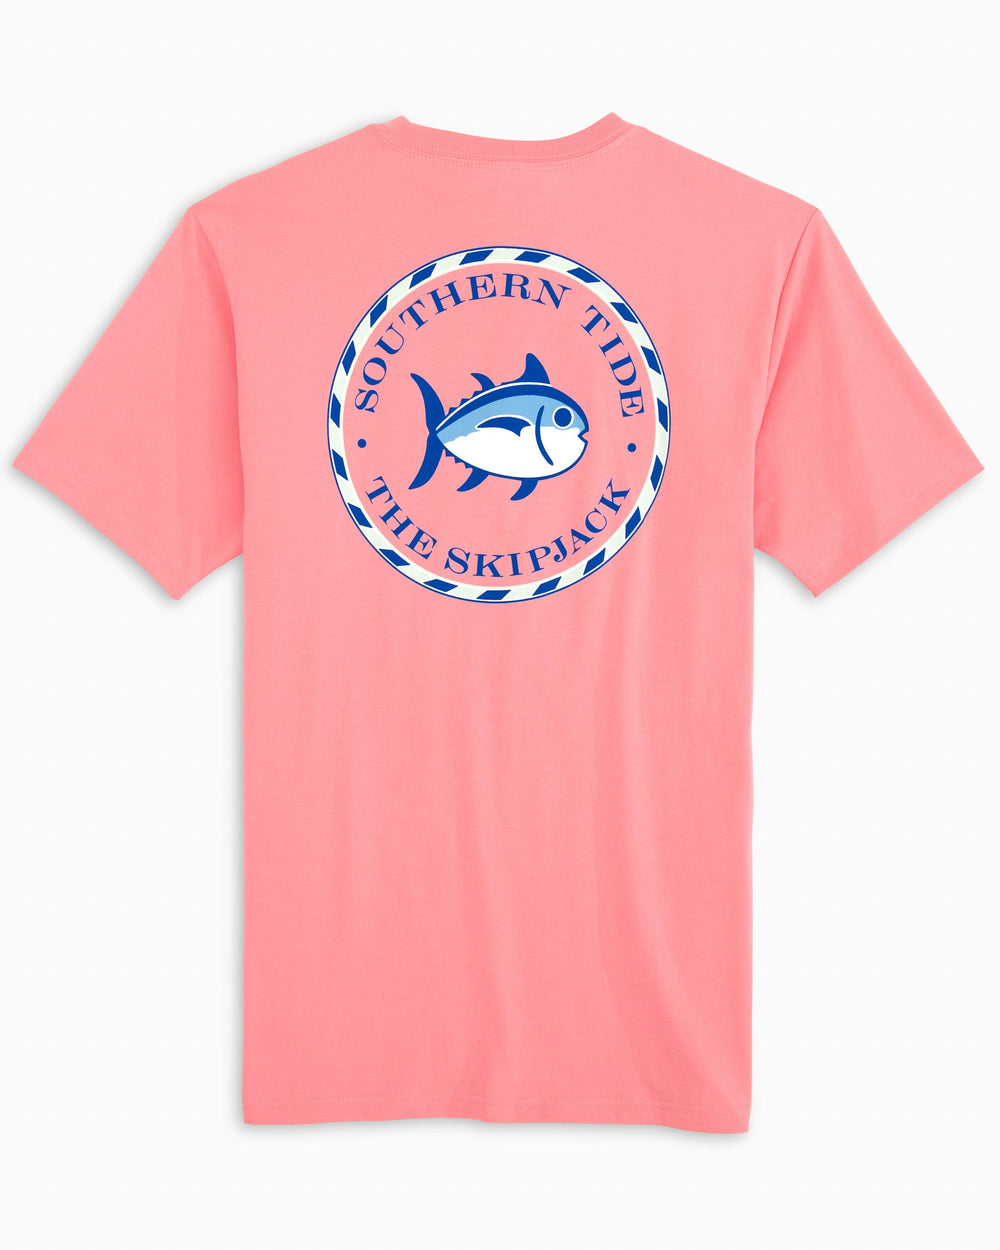 The model back view of the Women's Original Skipjack Medallion T-Shirt by Southern Tide - Citrus Punch